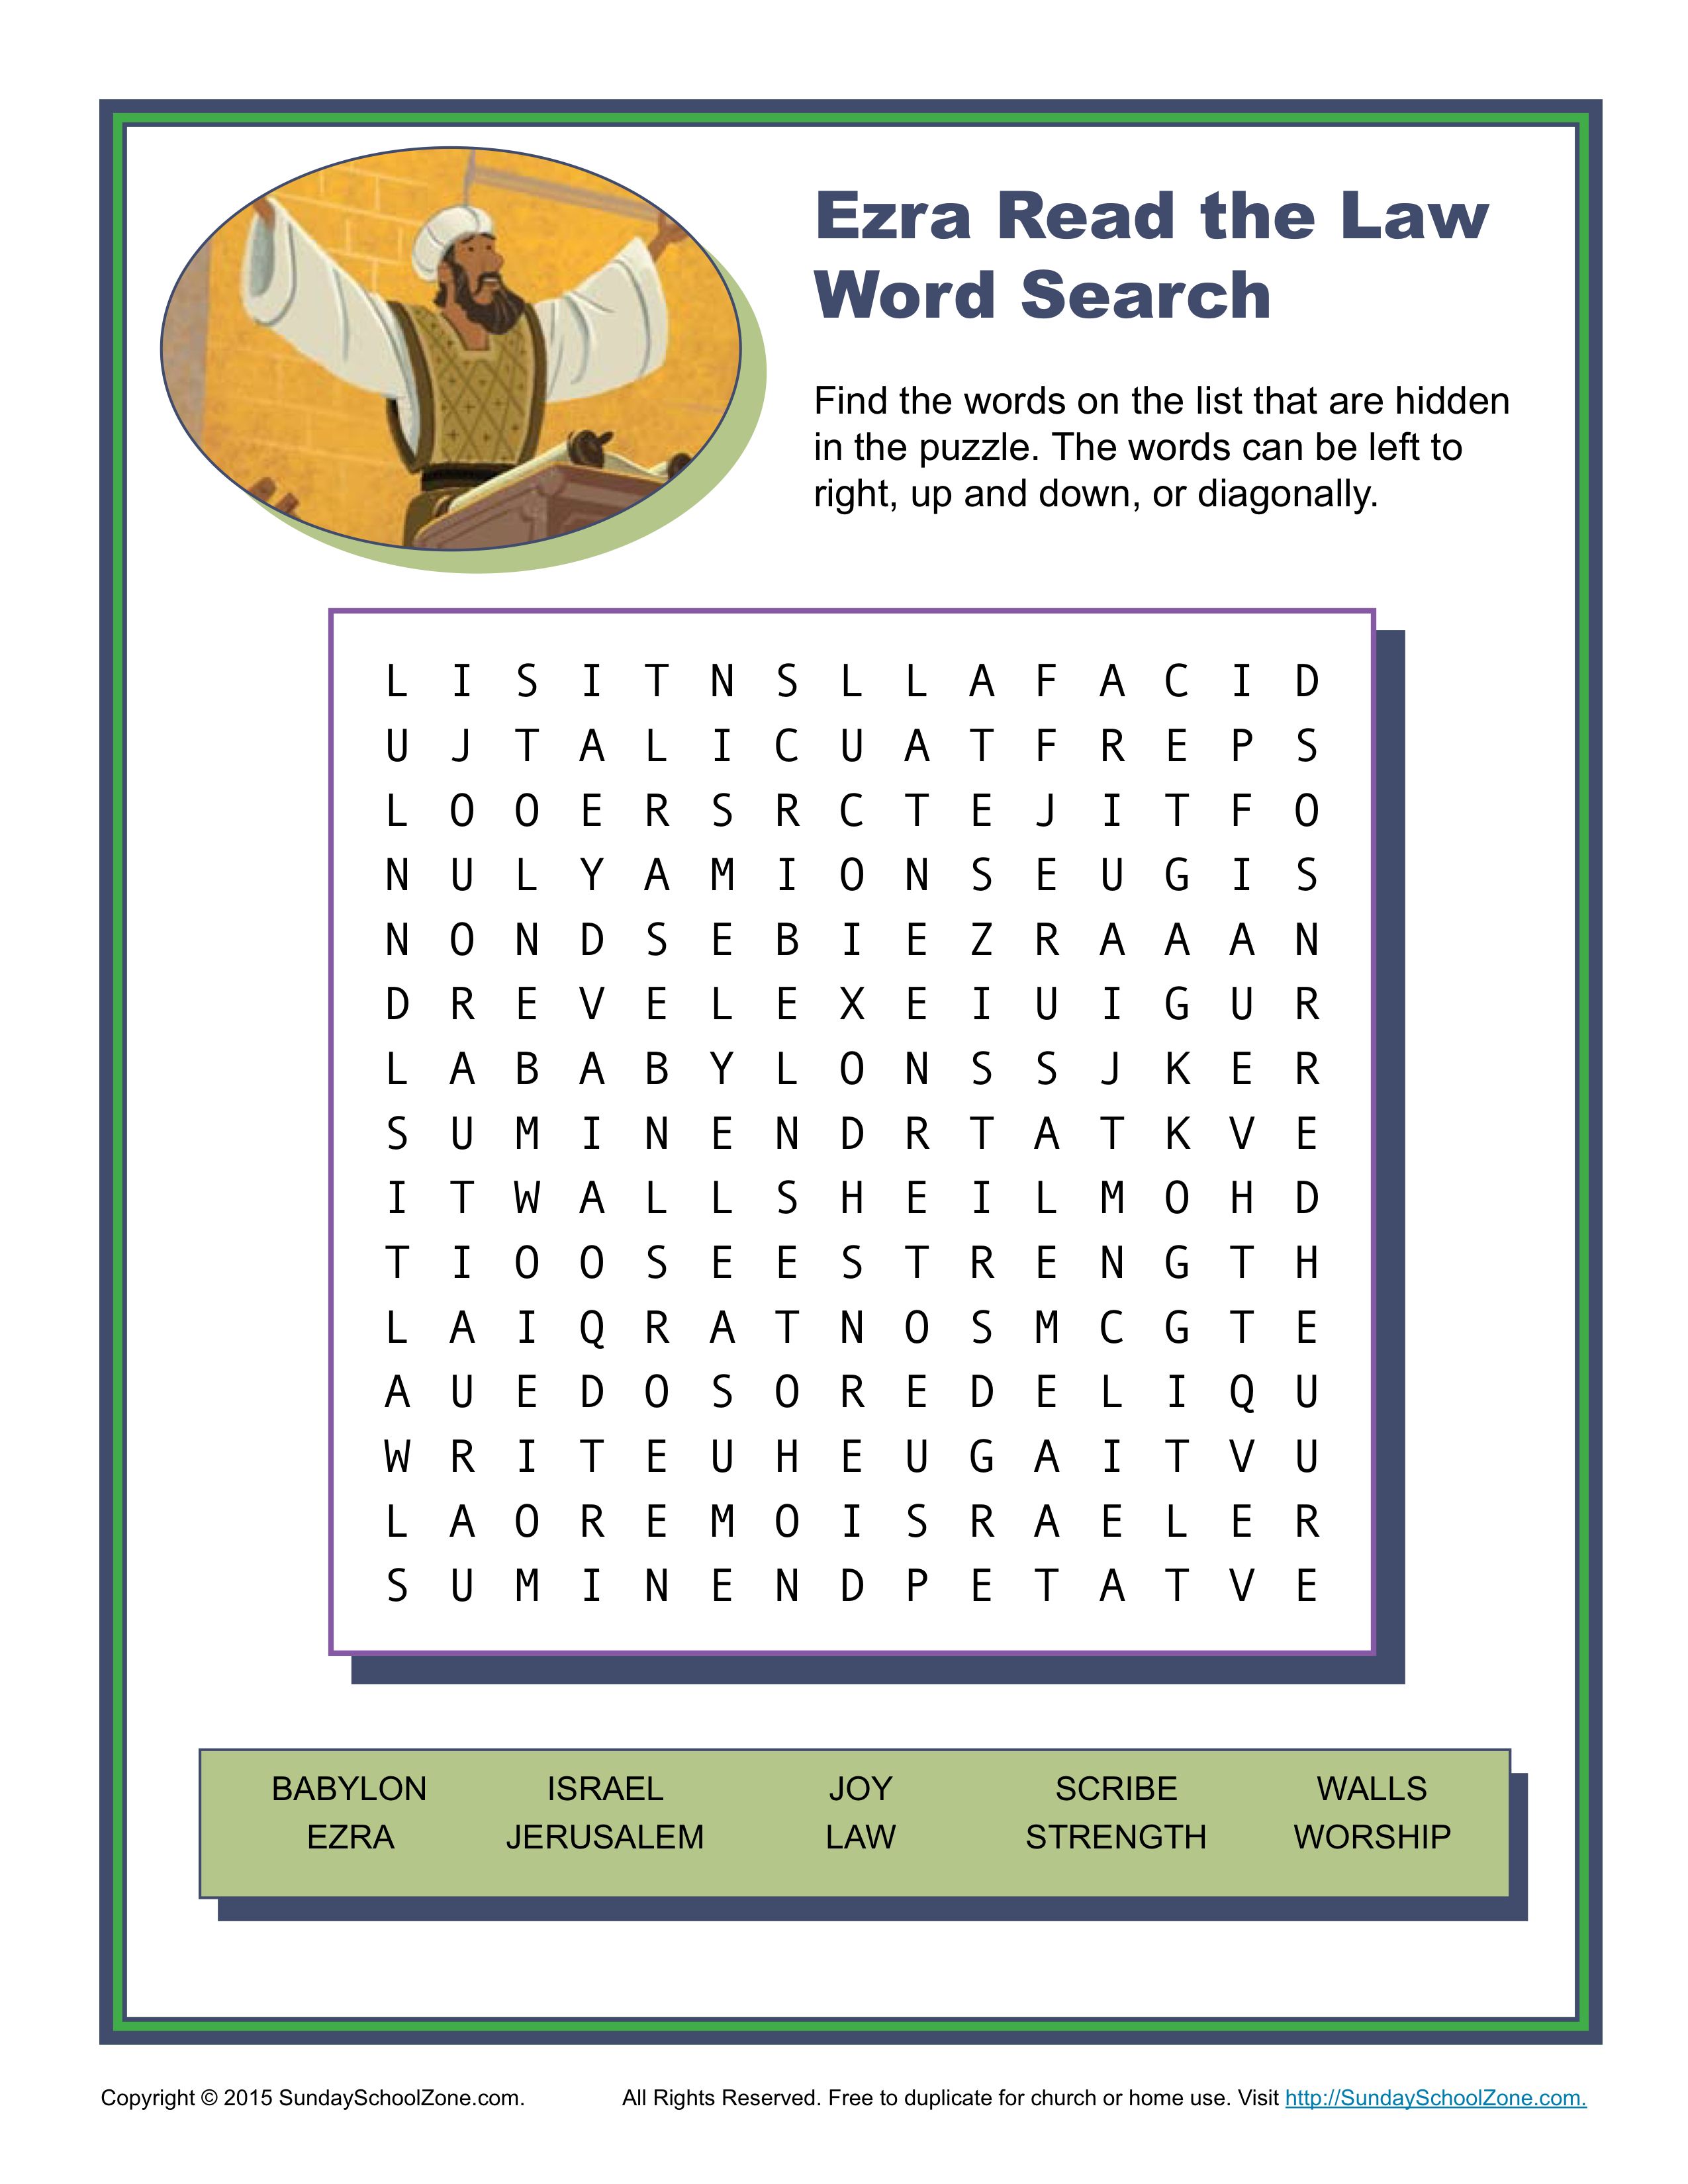 Ezra read the law word search bible activities for kids bible lessons for kids bible activities